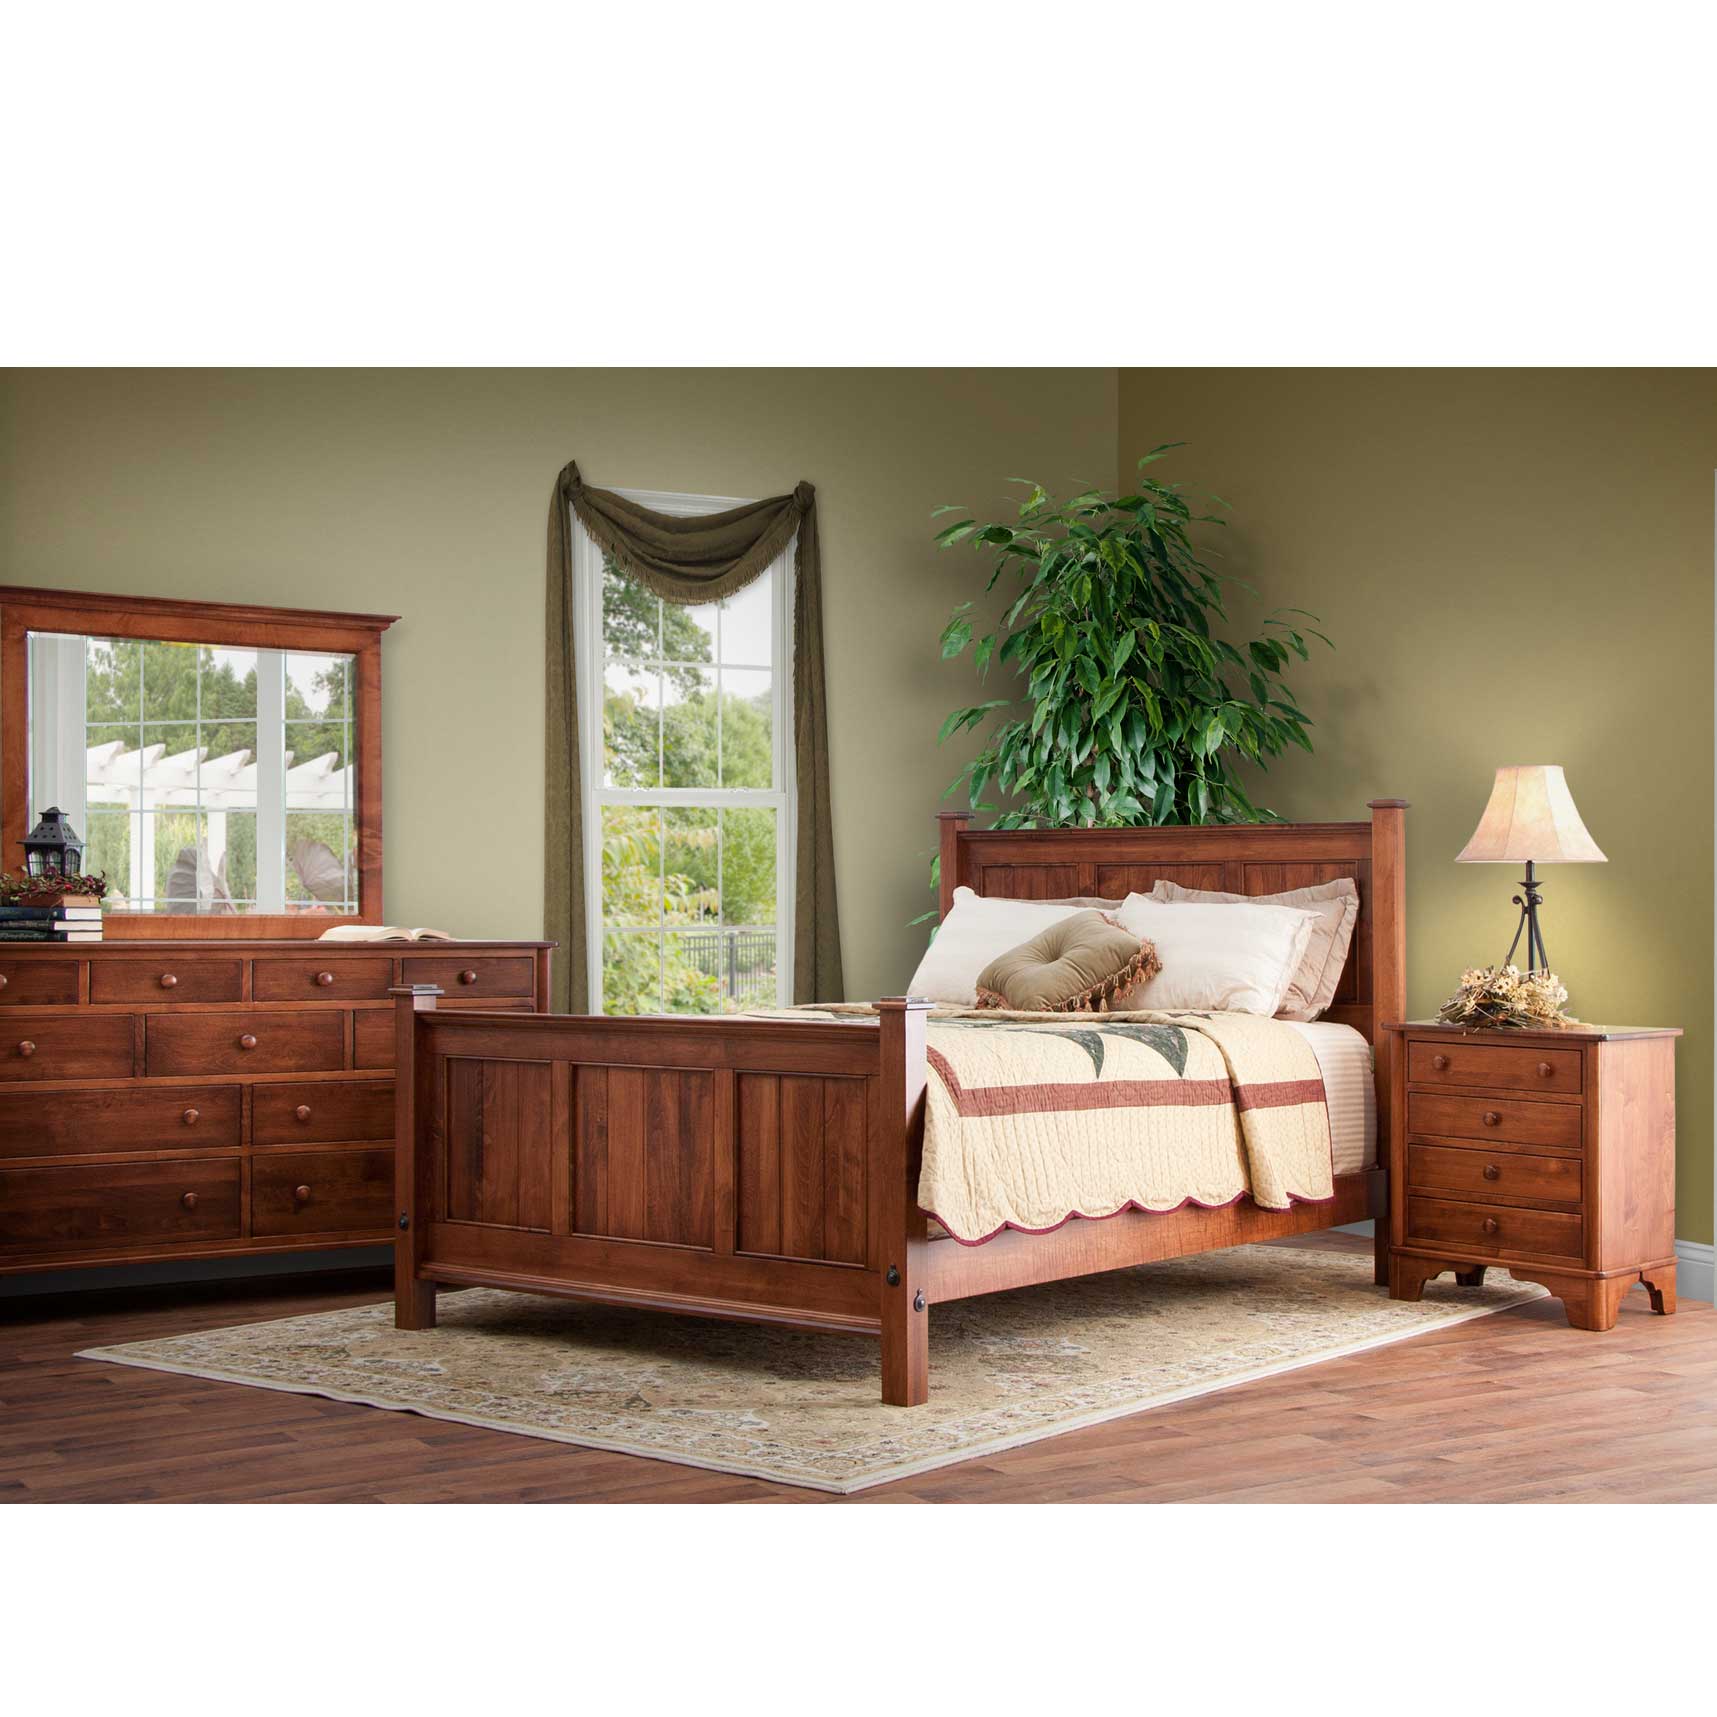 Amish New Amsterdam 4pc Panel Bedroom Set - snyders.furniture